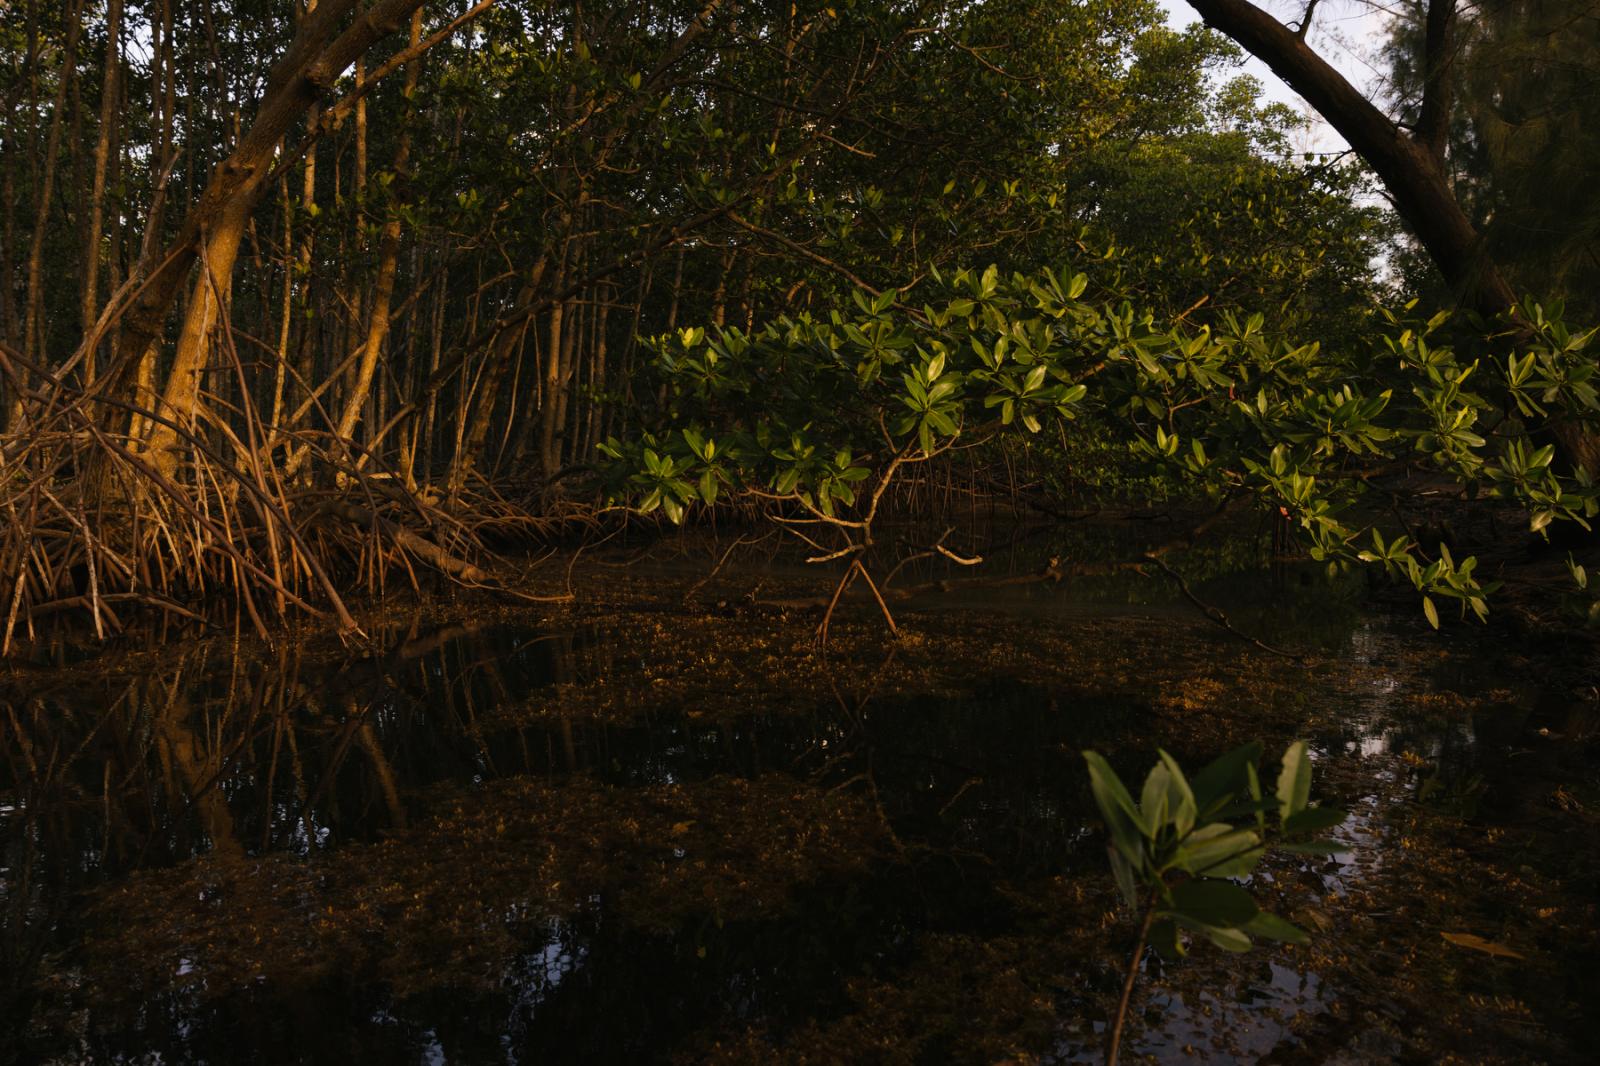 The mangrove forest at Oleta Ri...ach, Florida on July 22, 2022. 